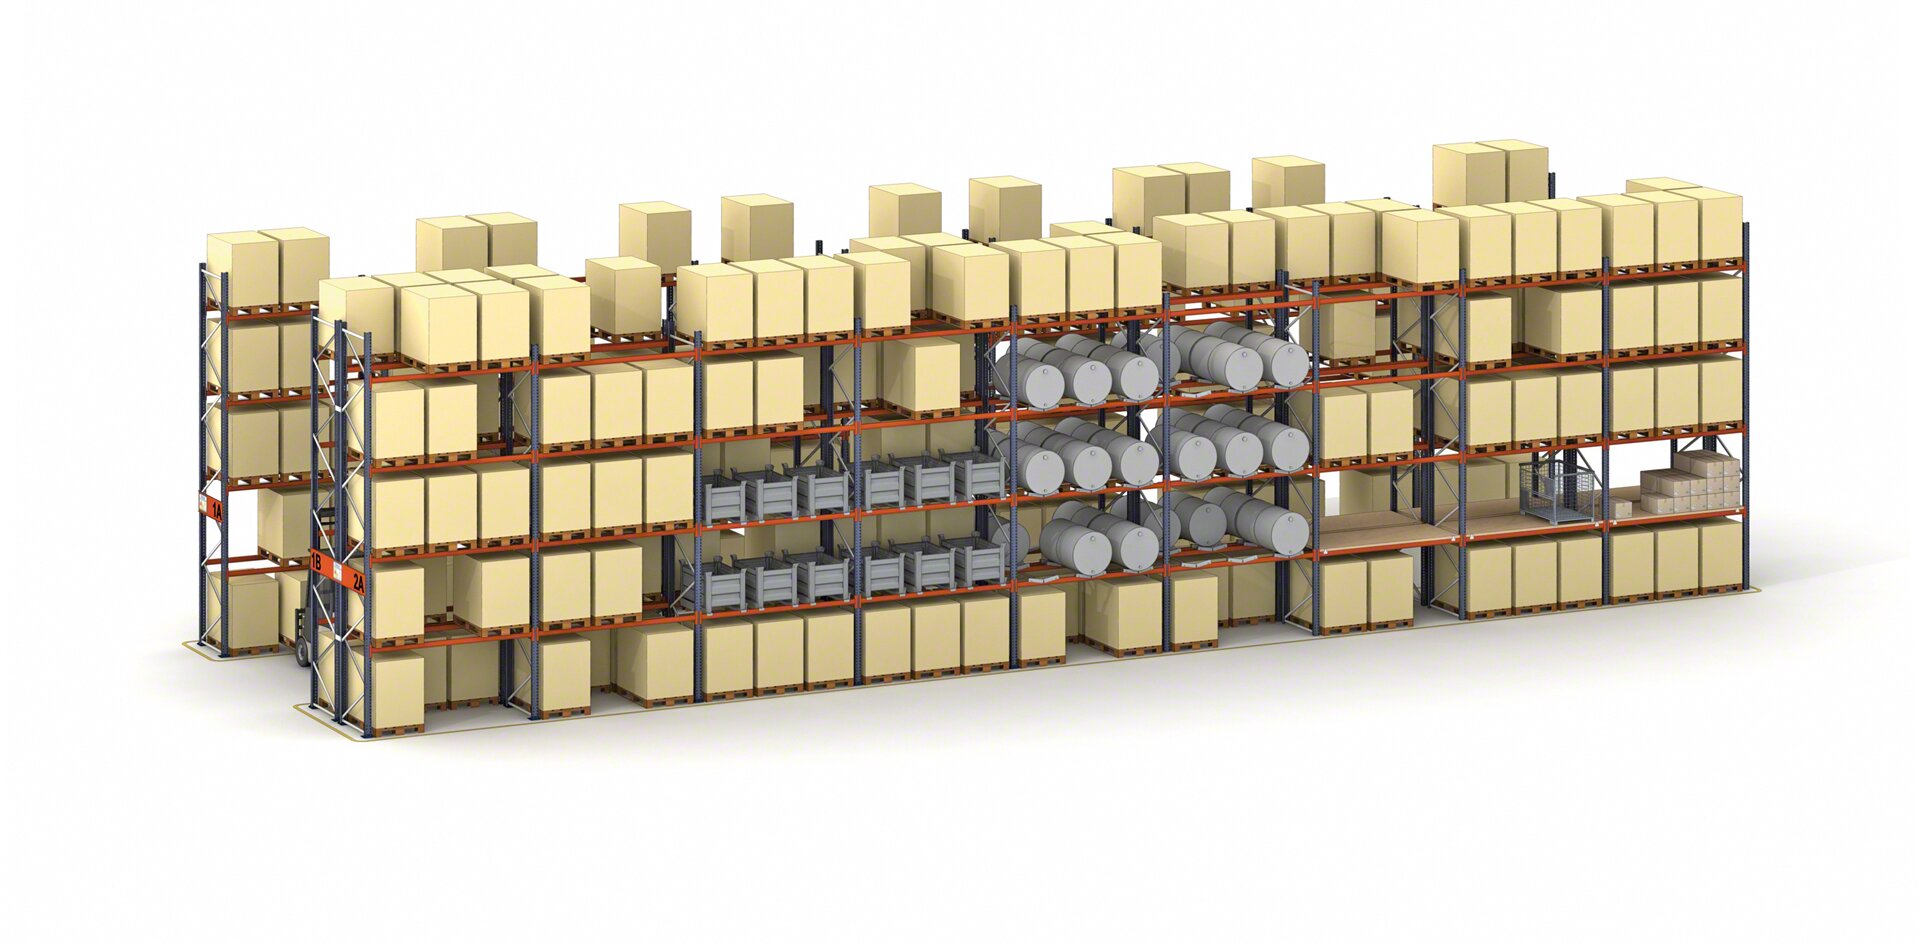 Selective pallet racking enables the storage of different types of unit loads